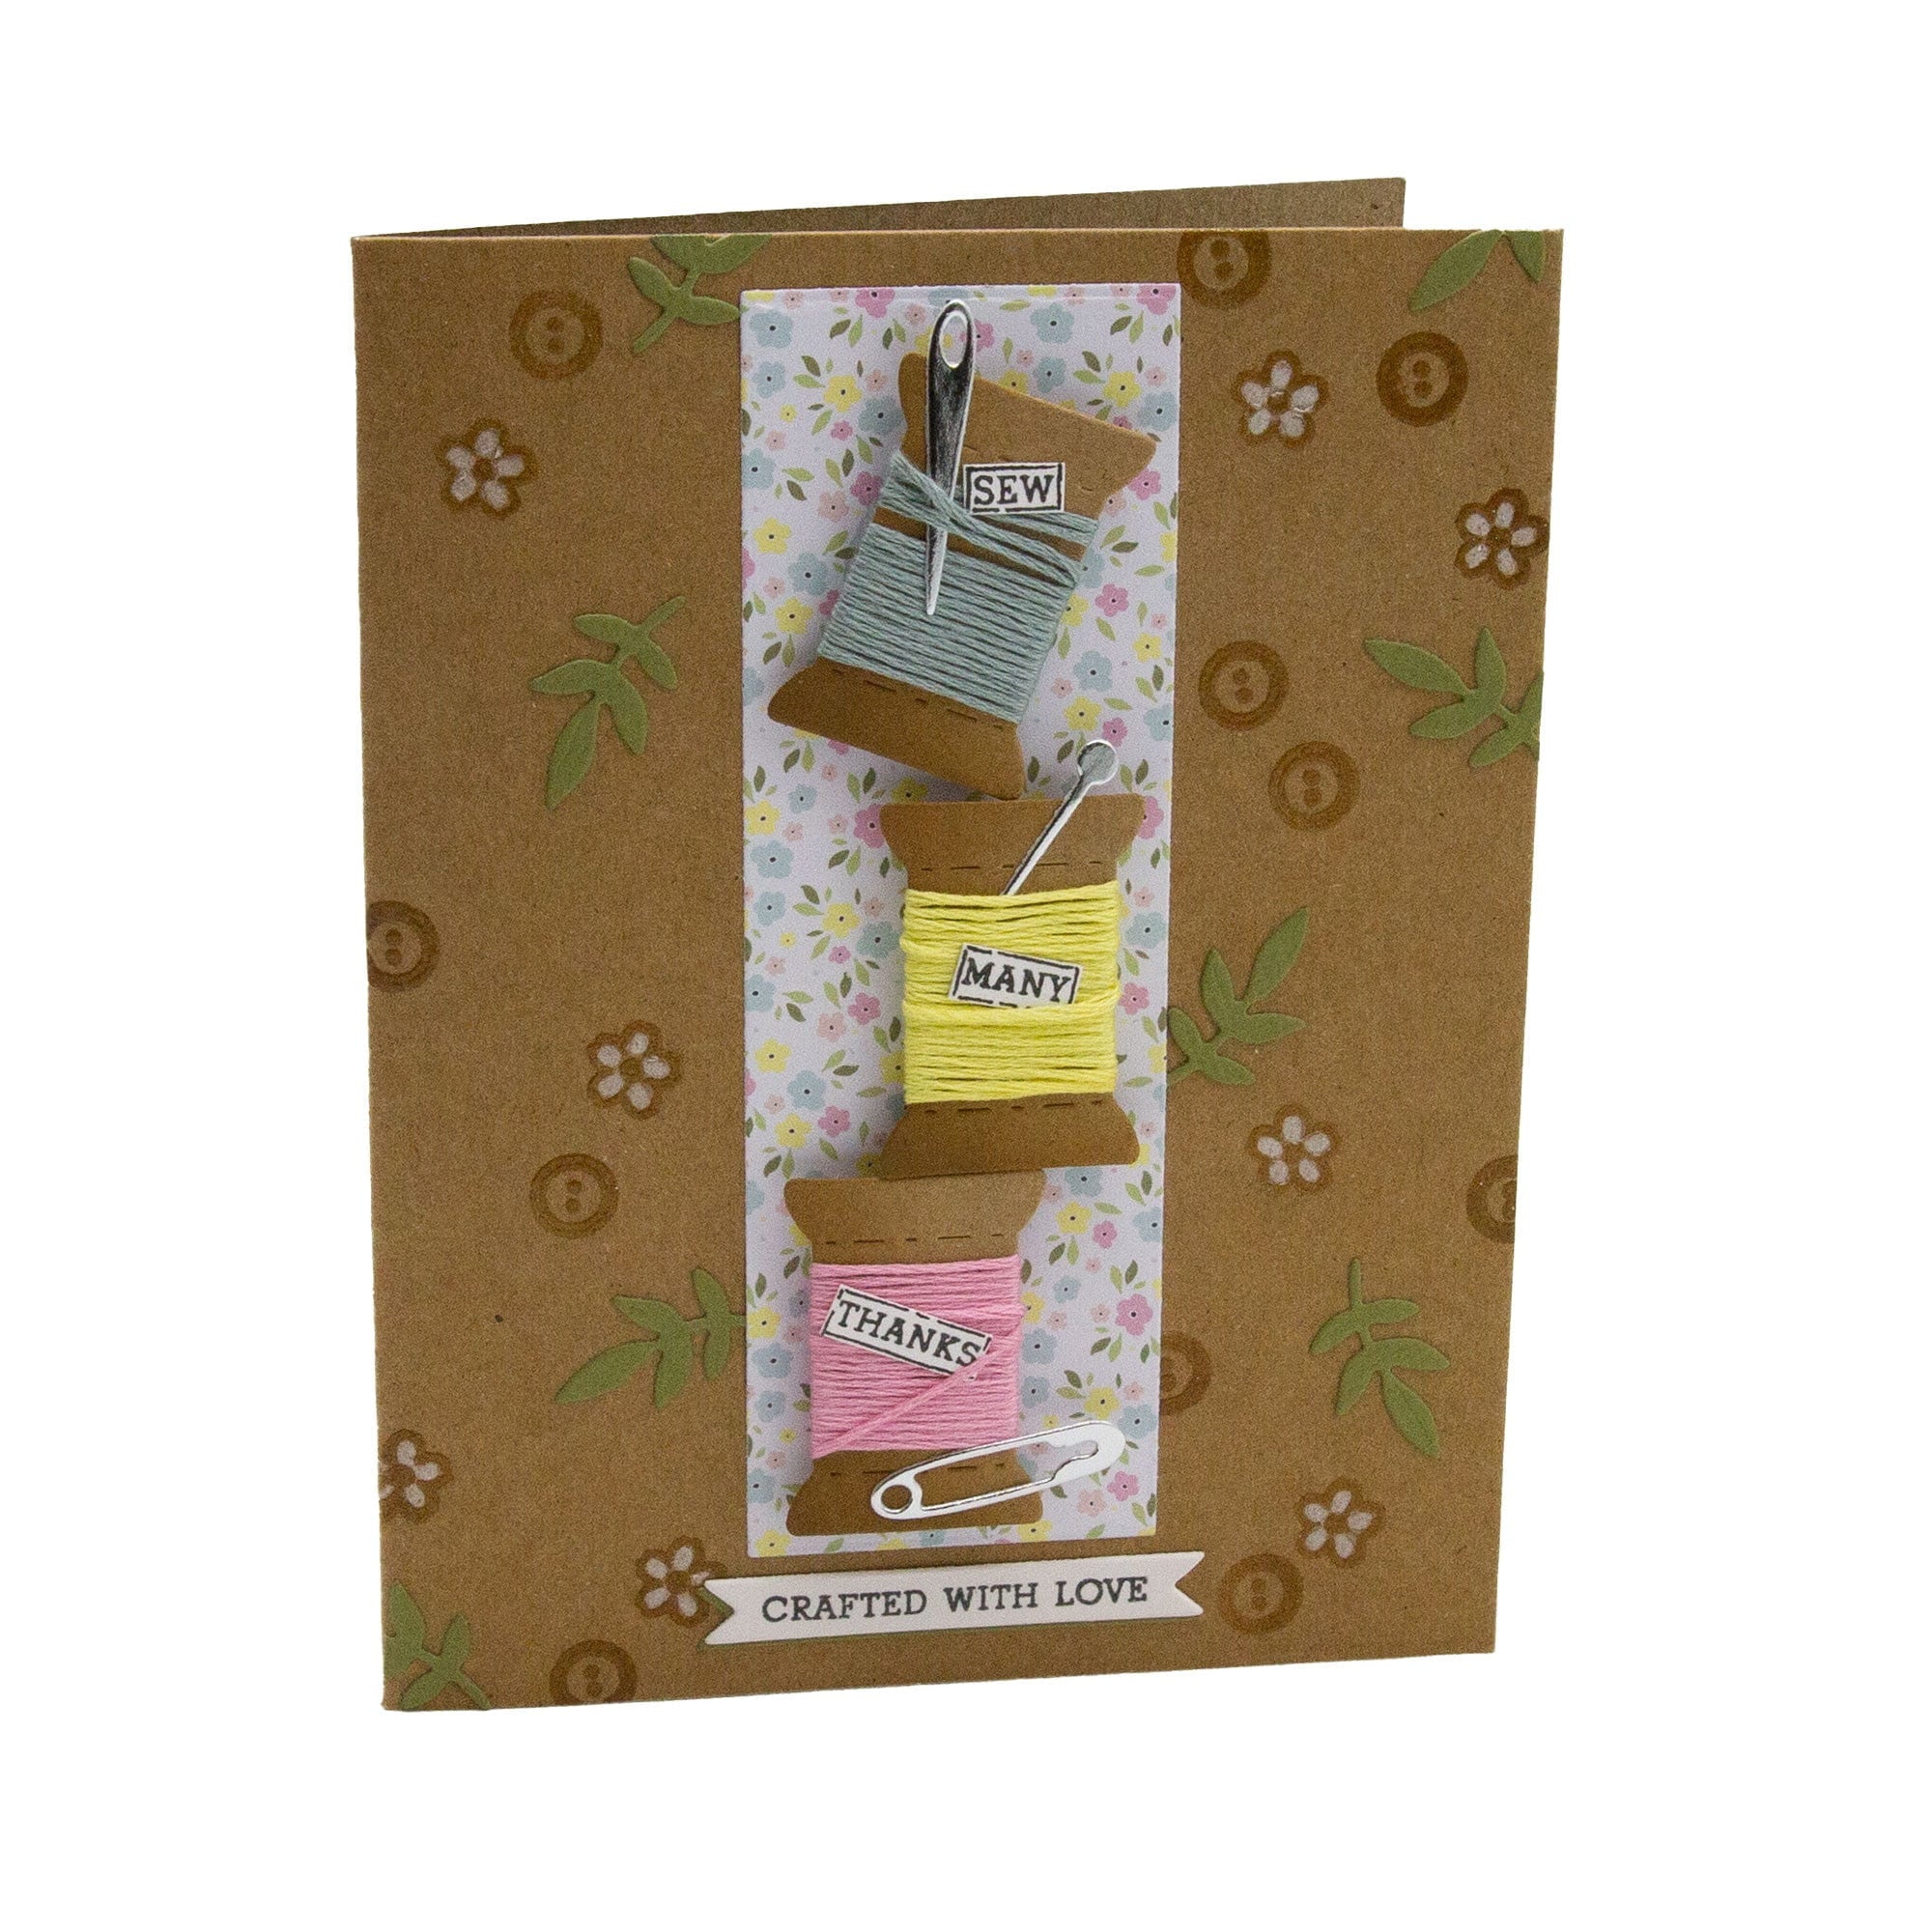 Assemble Shop and Studio: Crafty Project: Junior High Love Note Folding